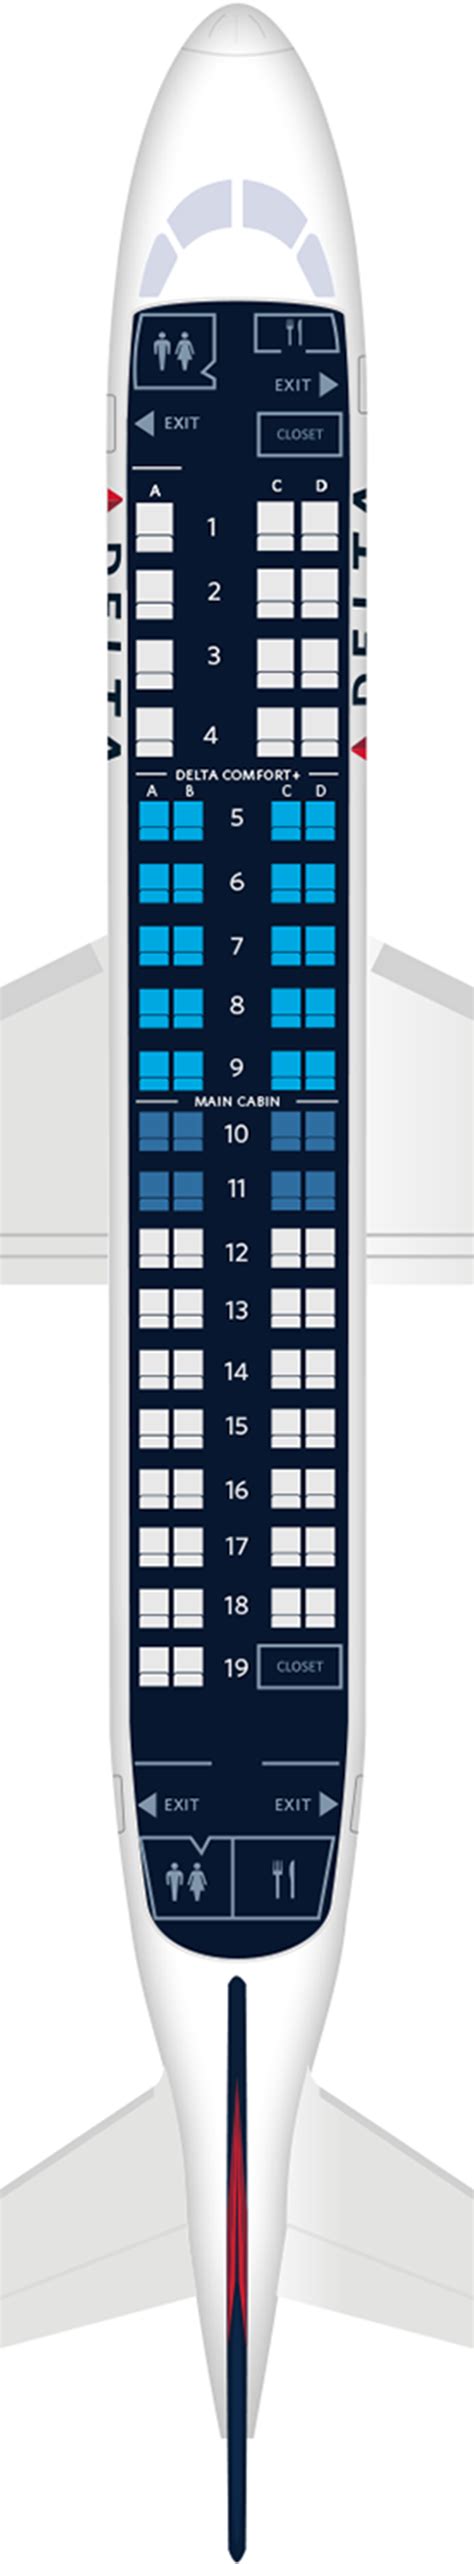 Embraer 175 seating chart - Envoy continues to add two-class Embraer 175 (E175) and Embraer 170 (E170) aircraft to our fleet. ... The spacious 76-seat E175 and 65 seat E170 aircraft offer a seamless travel experience to customers connecting to and from mainline flights. As we welcome large E175 and E170 regional jets to the fleet, Envoy continues to operate a fleet of ...